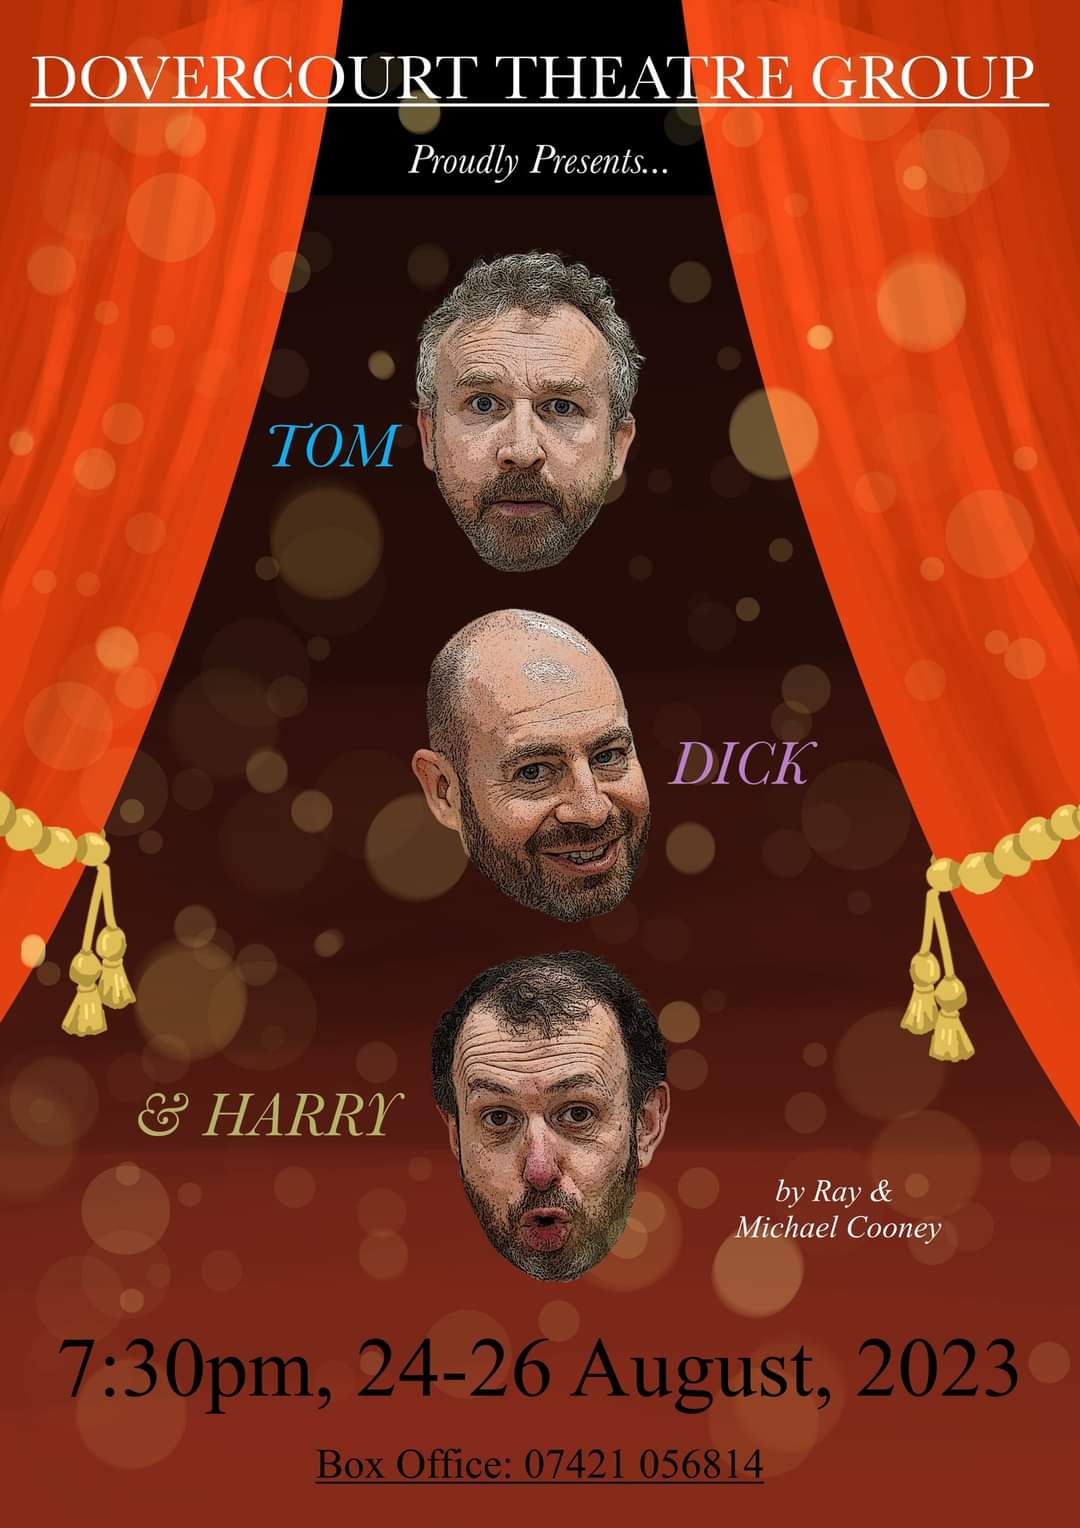 Between open theatre curtains, faces of characters Tom, Dick and Harry next to their names.  Text: Dovercourt Theatre Group proudly presents Tom, Dick & Harry by Ray and Michael Cooney.  7:30pm, 24-26 August 2023.  Box Office 07421 056814